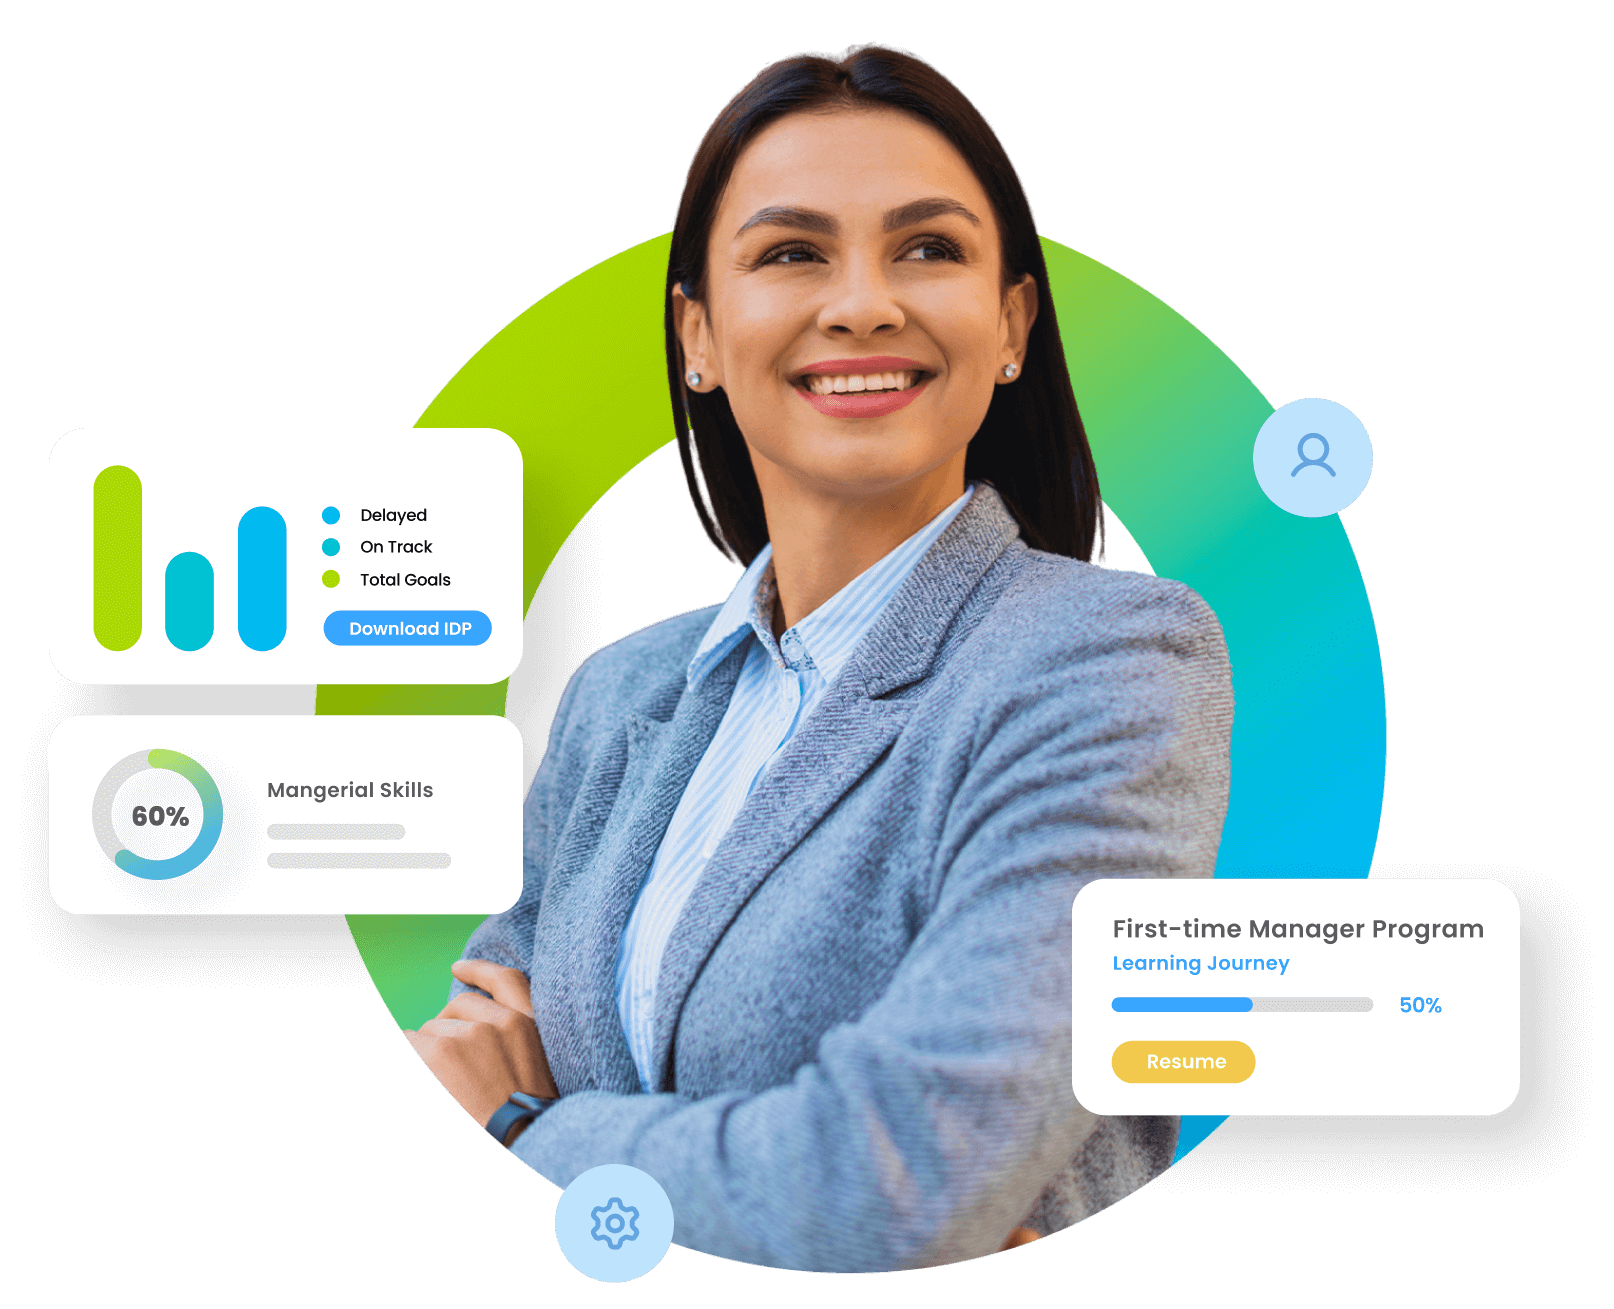 Confident professional woman in a blazer with progress icons, highlighting comprehensive development program for first-time managers